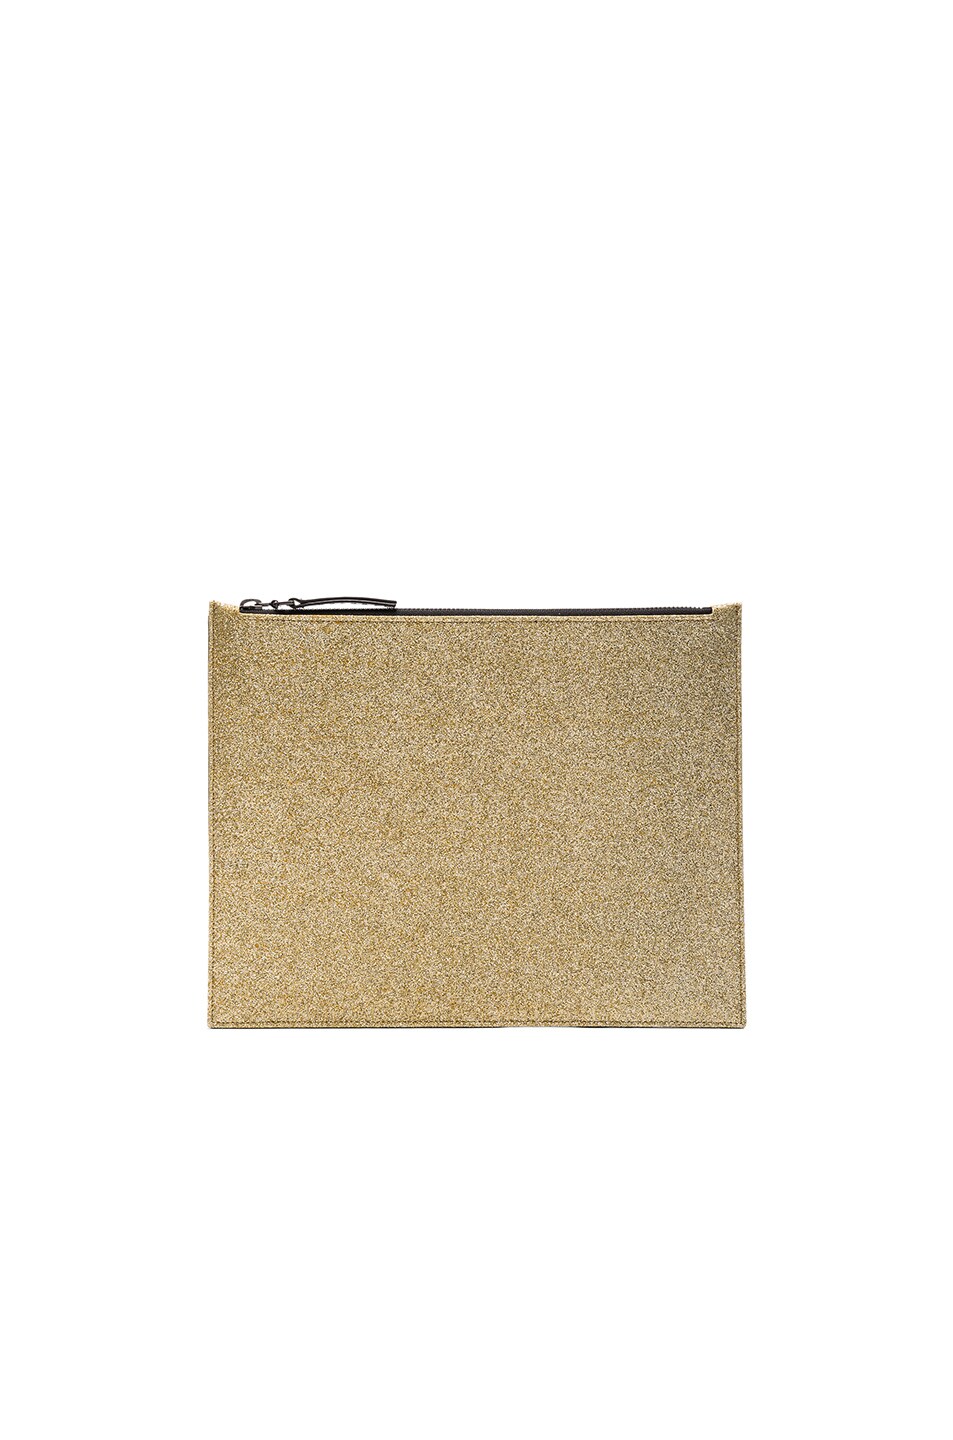 Image 1 of Maison Margiela Glitter & Calf Leather Pouch in Light Gold & Black